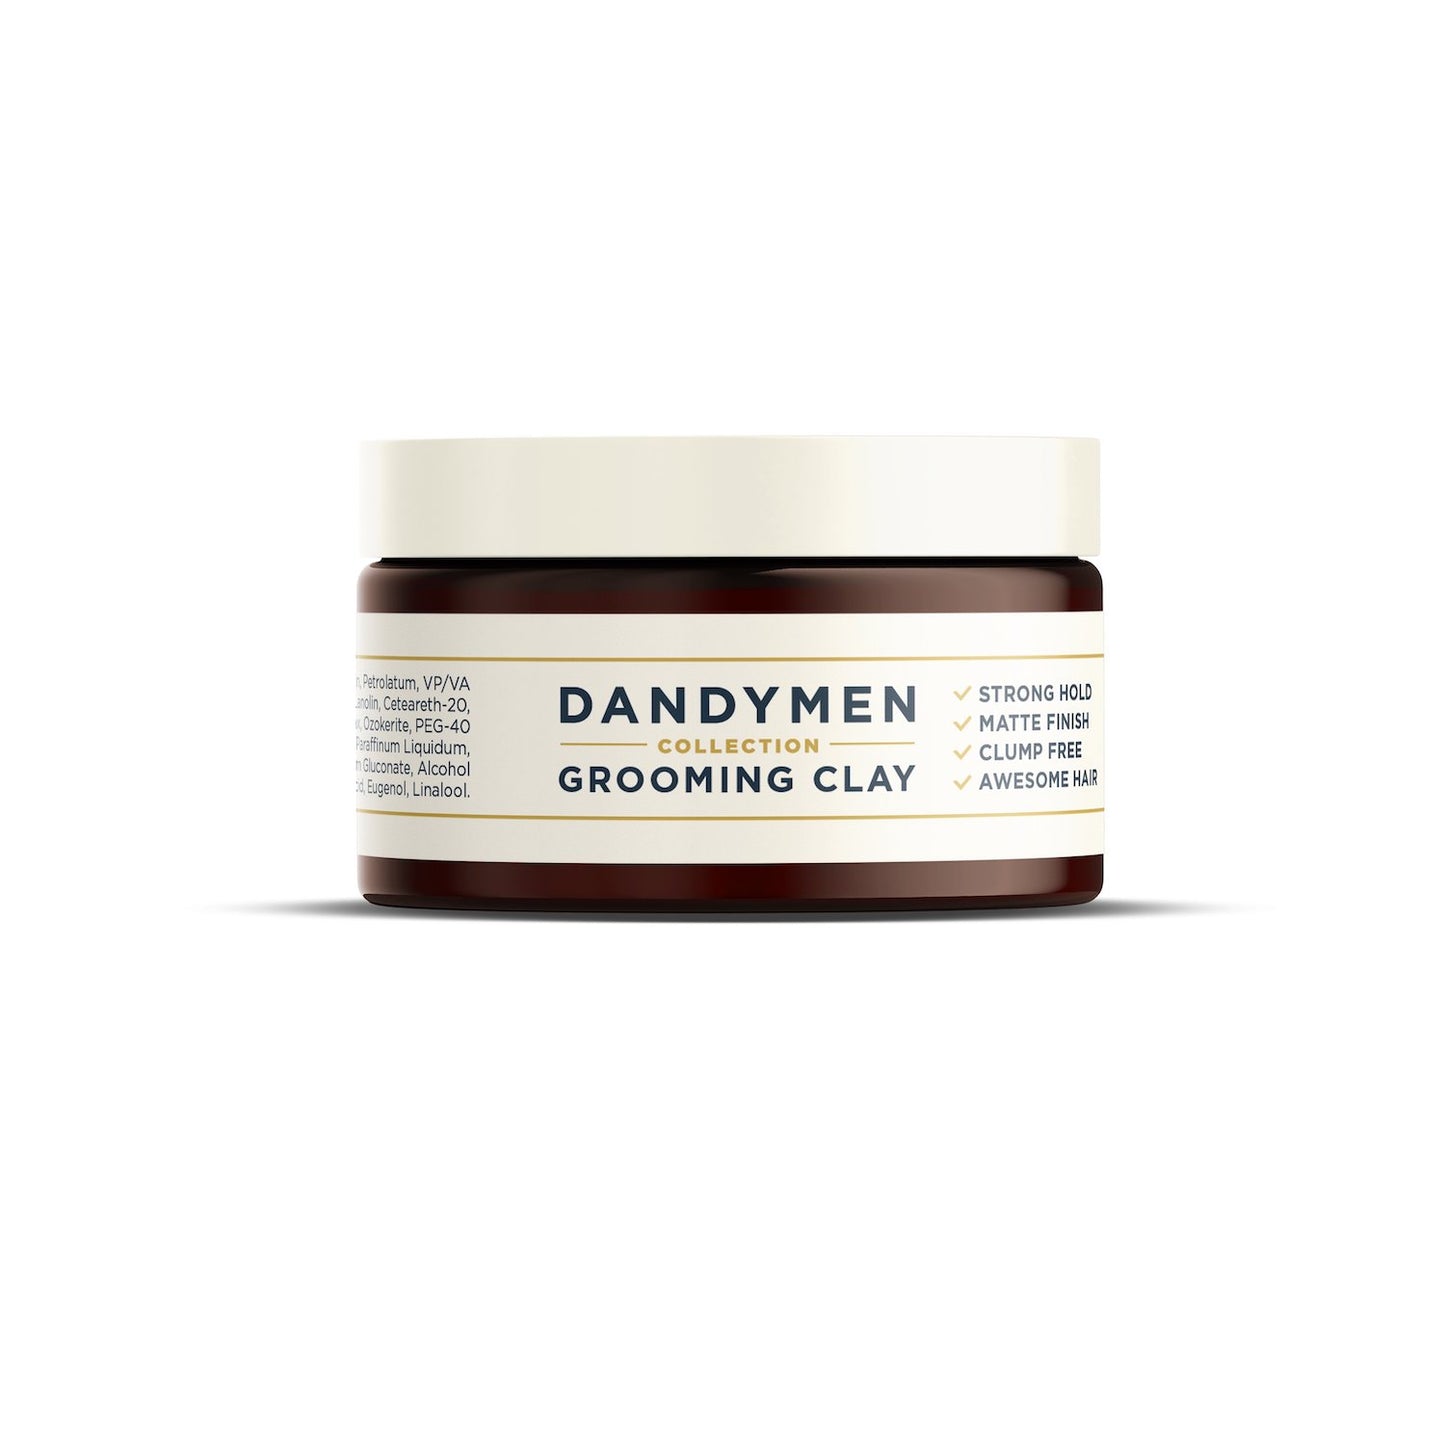 Dandymen Grooming Clay Strong Hold 3.4 oz